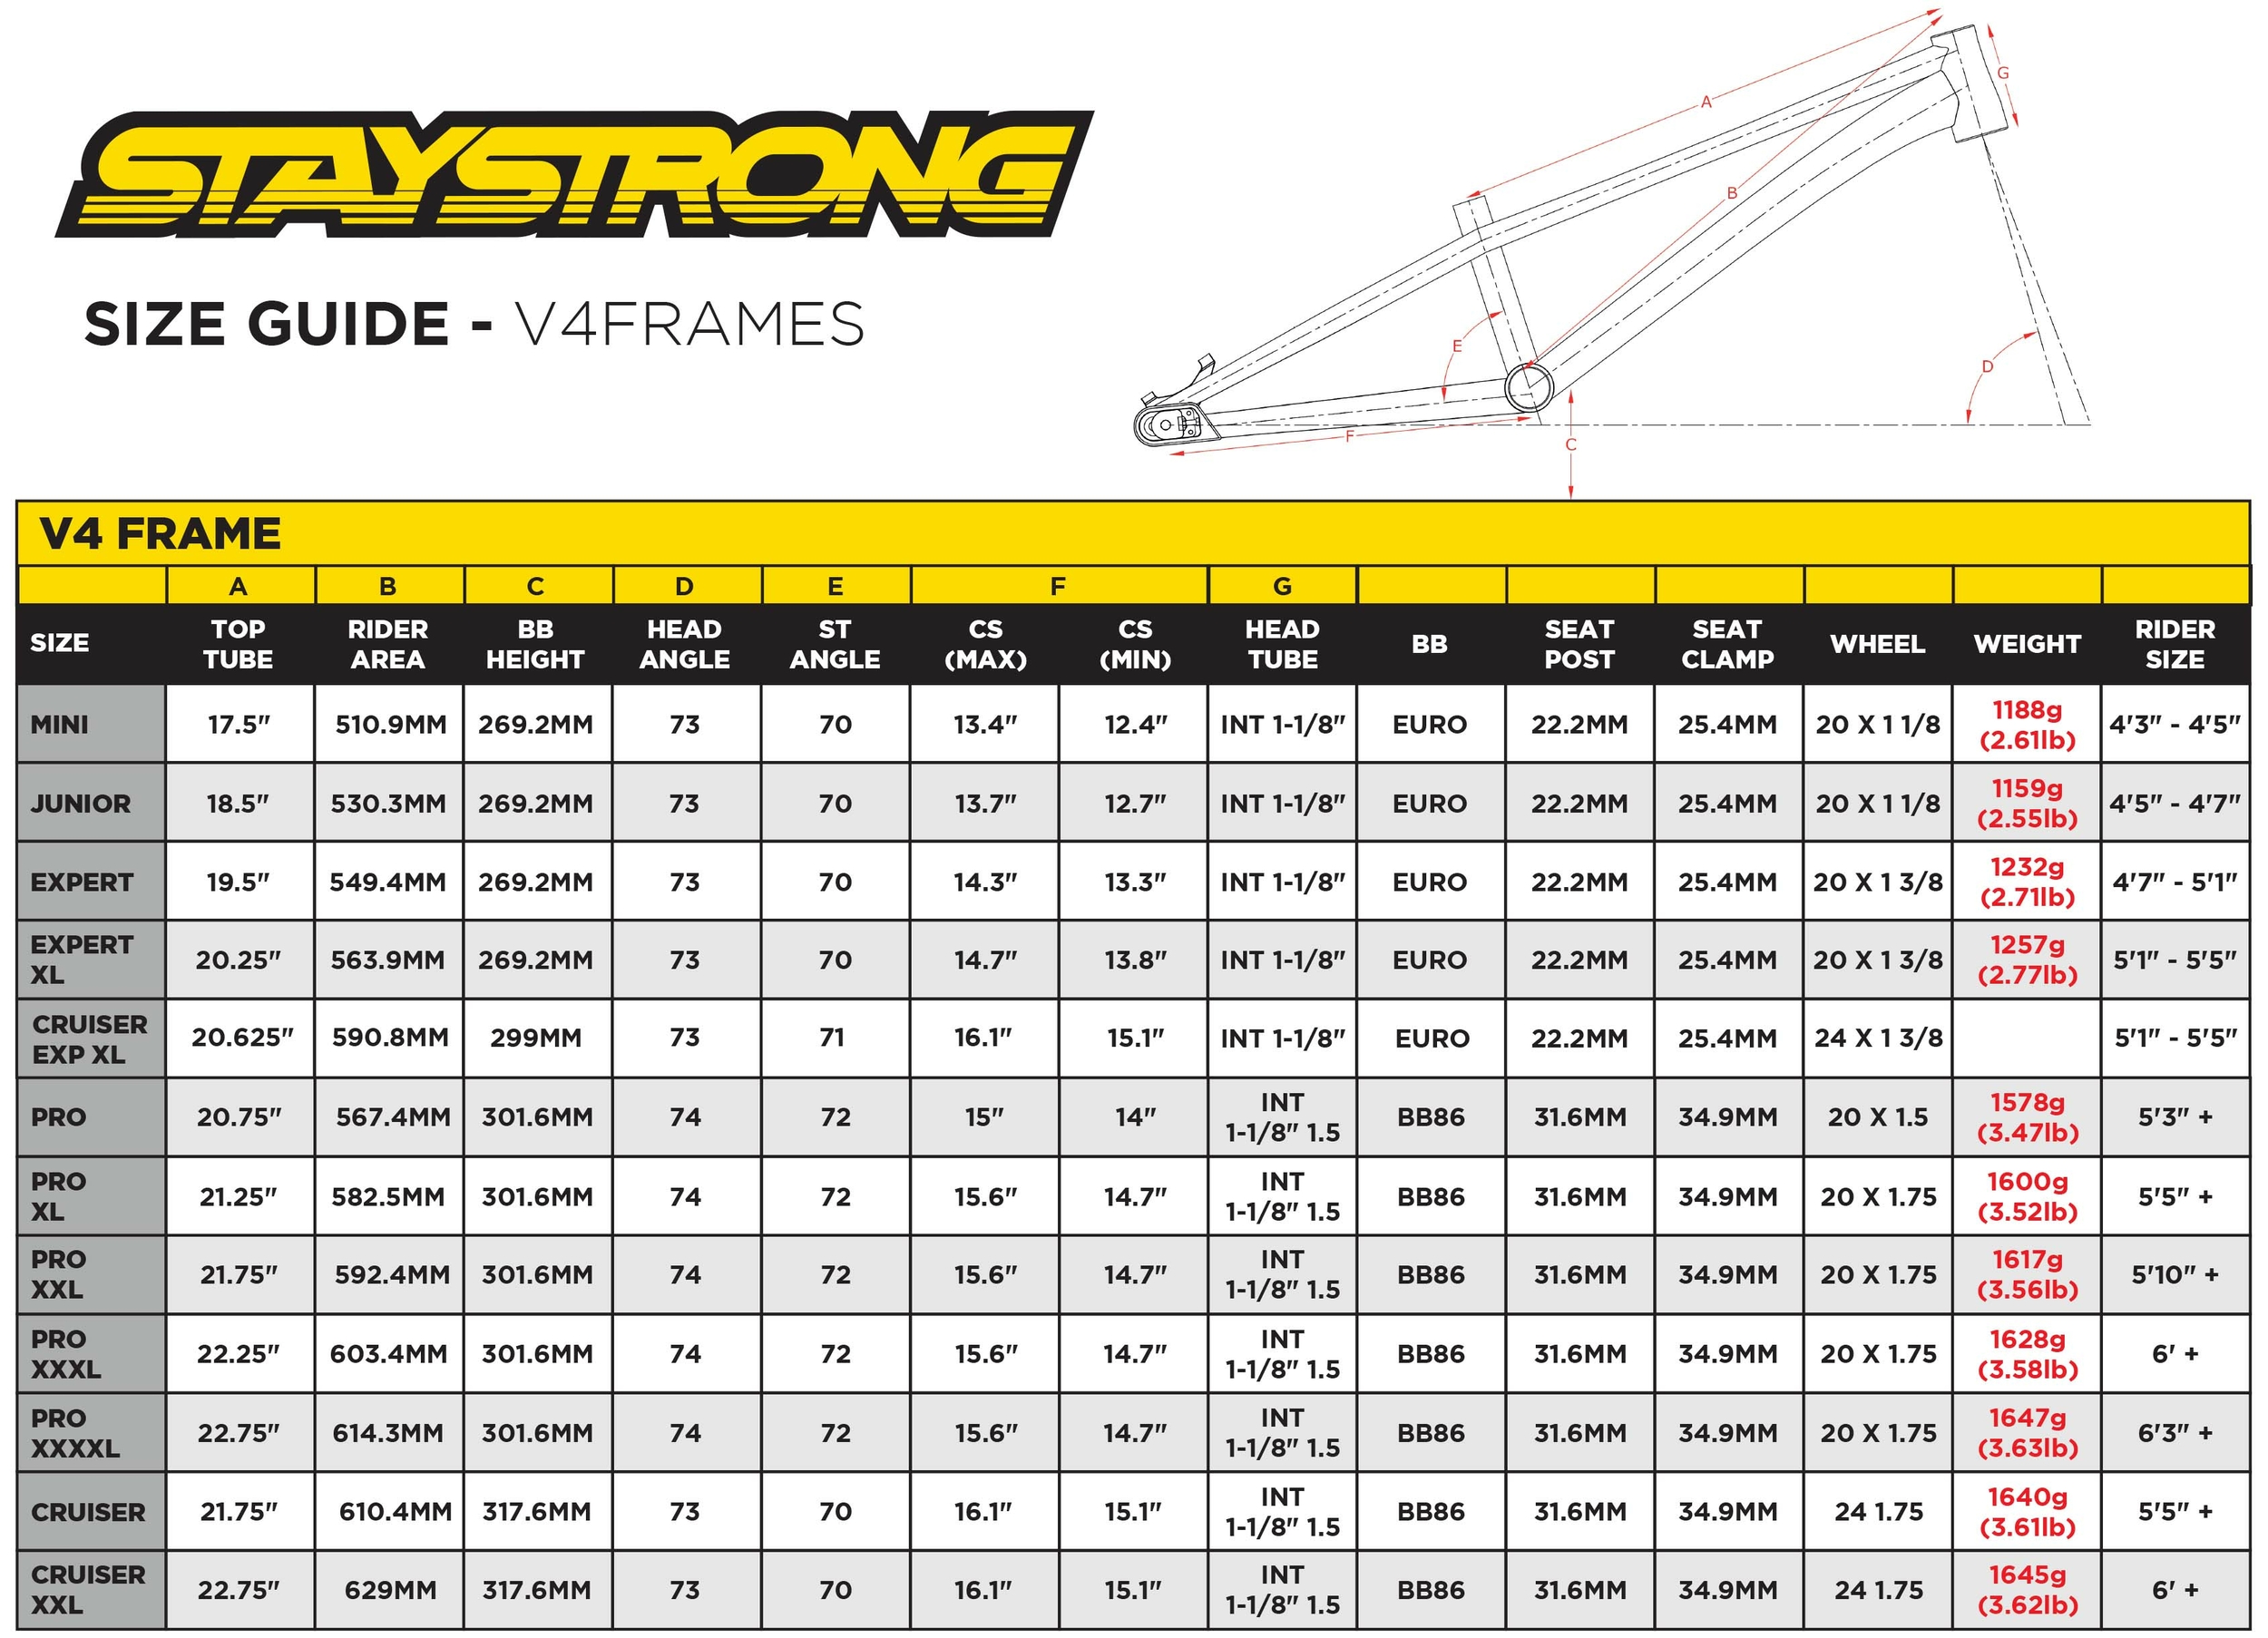 STAY_STRONG_V4FRAME_SIZE_GUIDE (1)